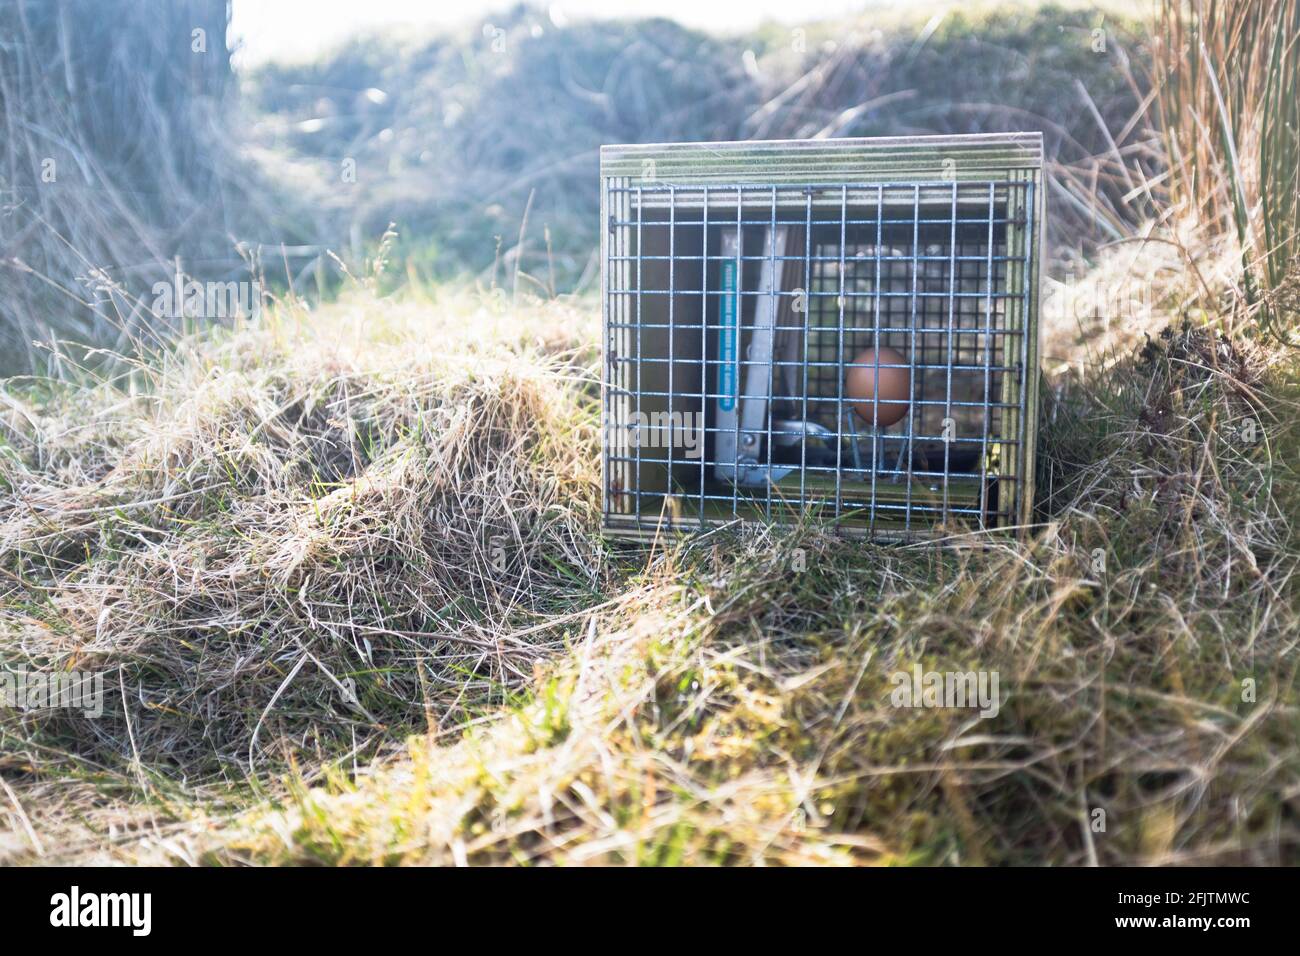 dh Trap STOATS UK Scottish stoat snare traps Orkney Native Wildlife Project Orkney RSPB Scotland trapping vermin bird eggs in nest protection bait Stock Photo